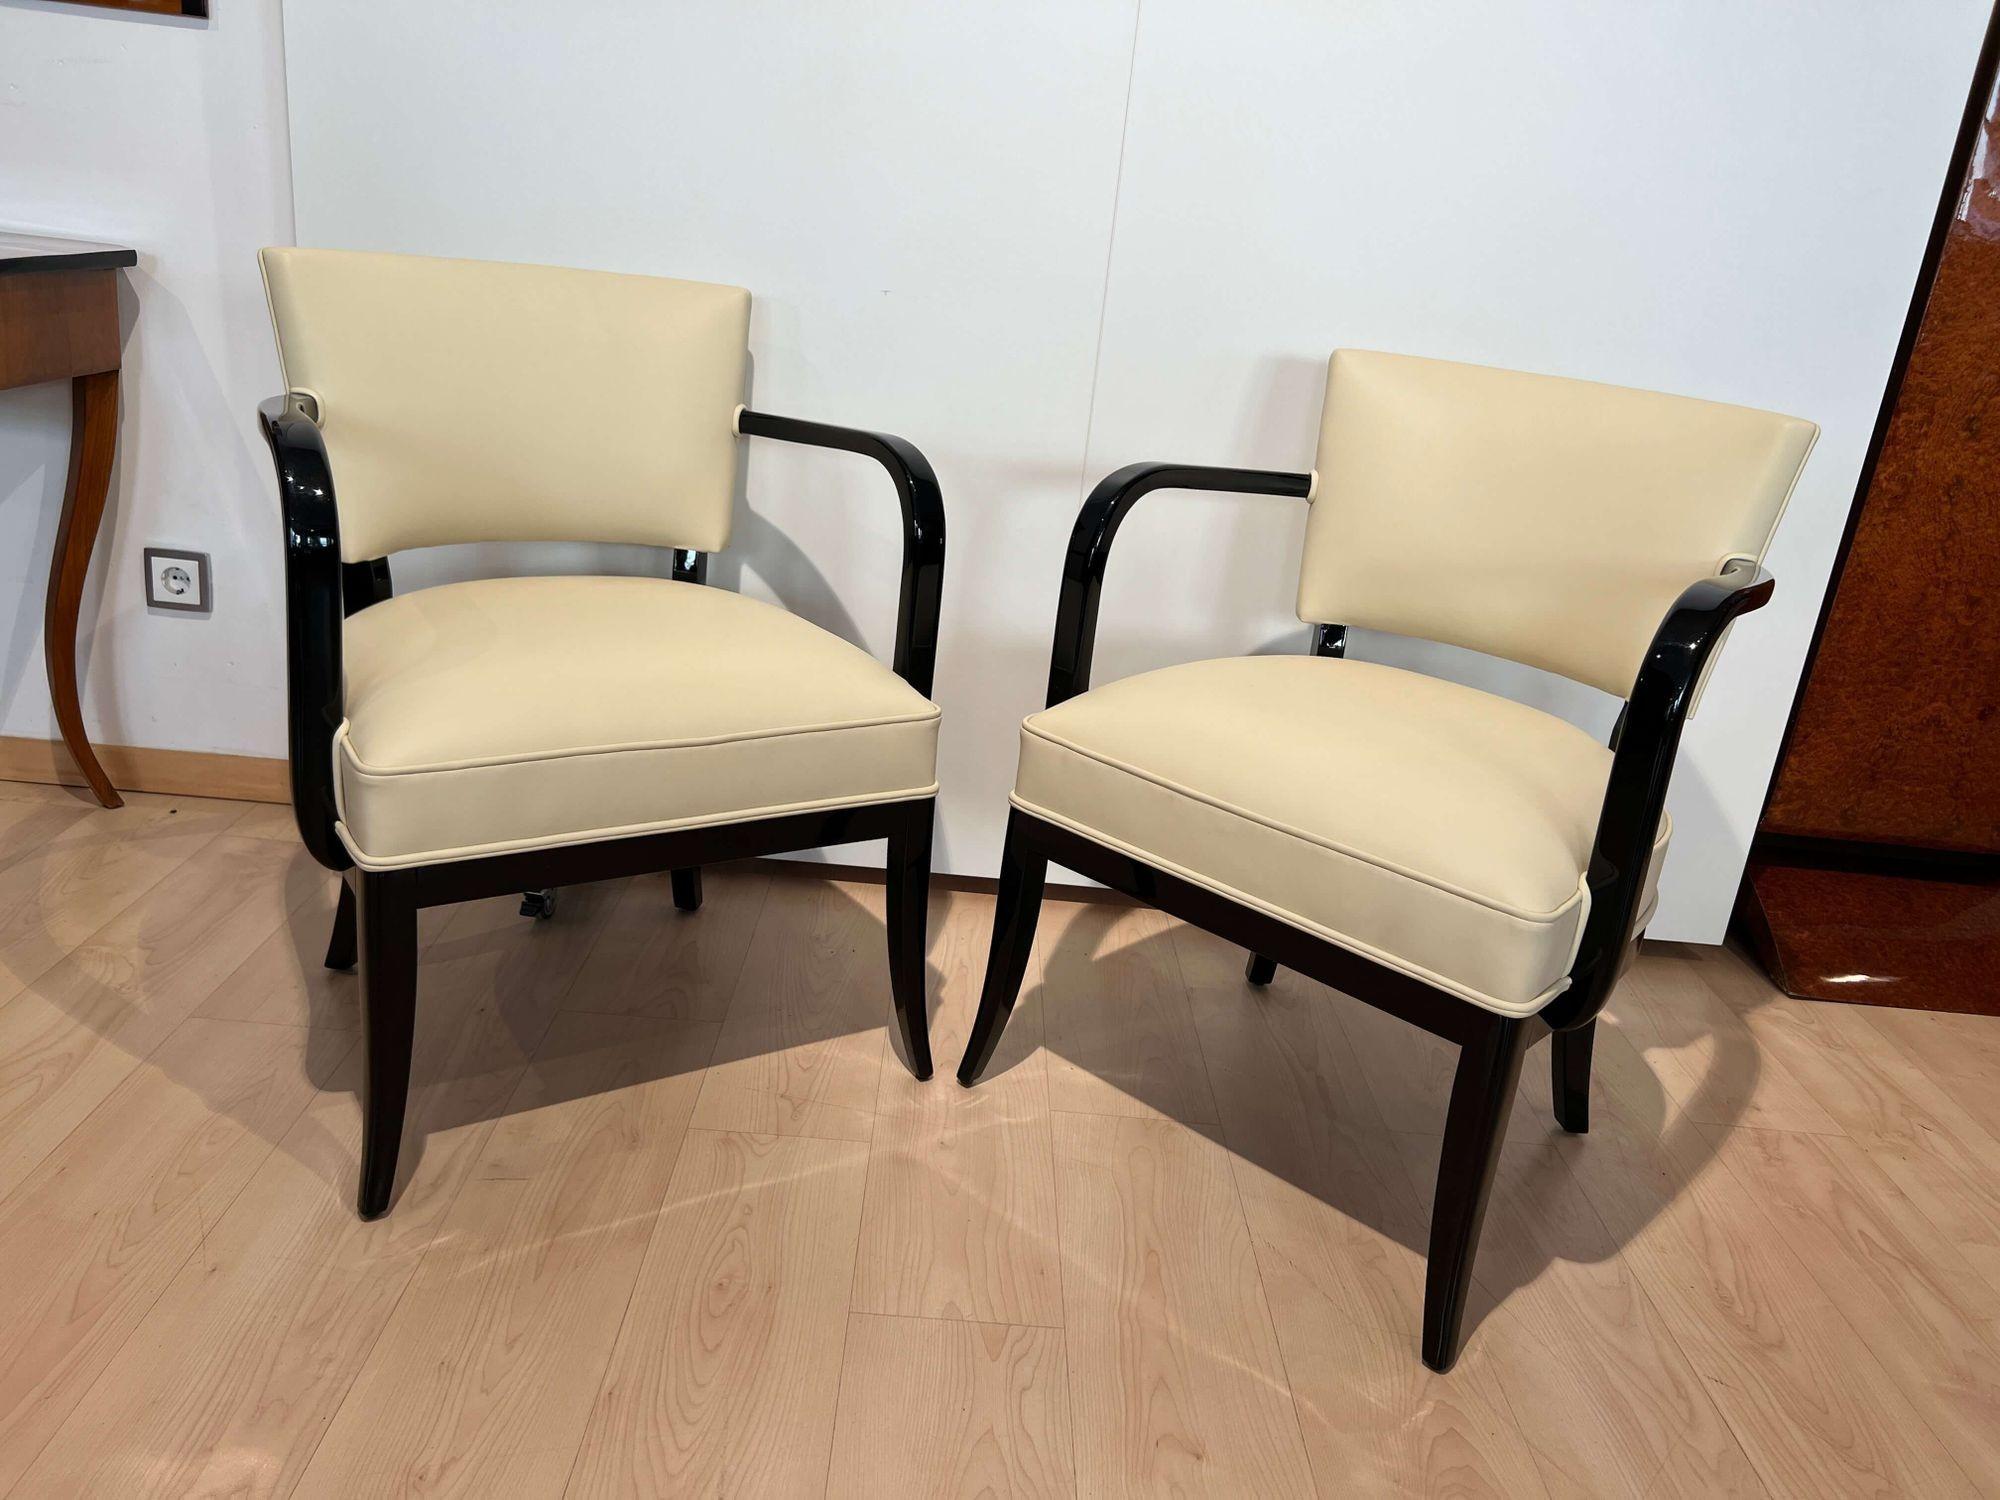 Pair of Art Deco Armchairs, Black Lacquer, Creme Leather, France, 1930s For Sale 1